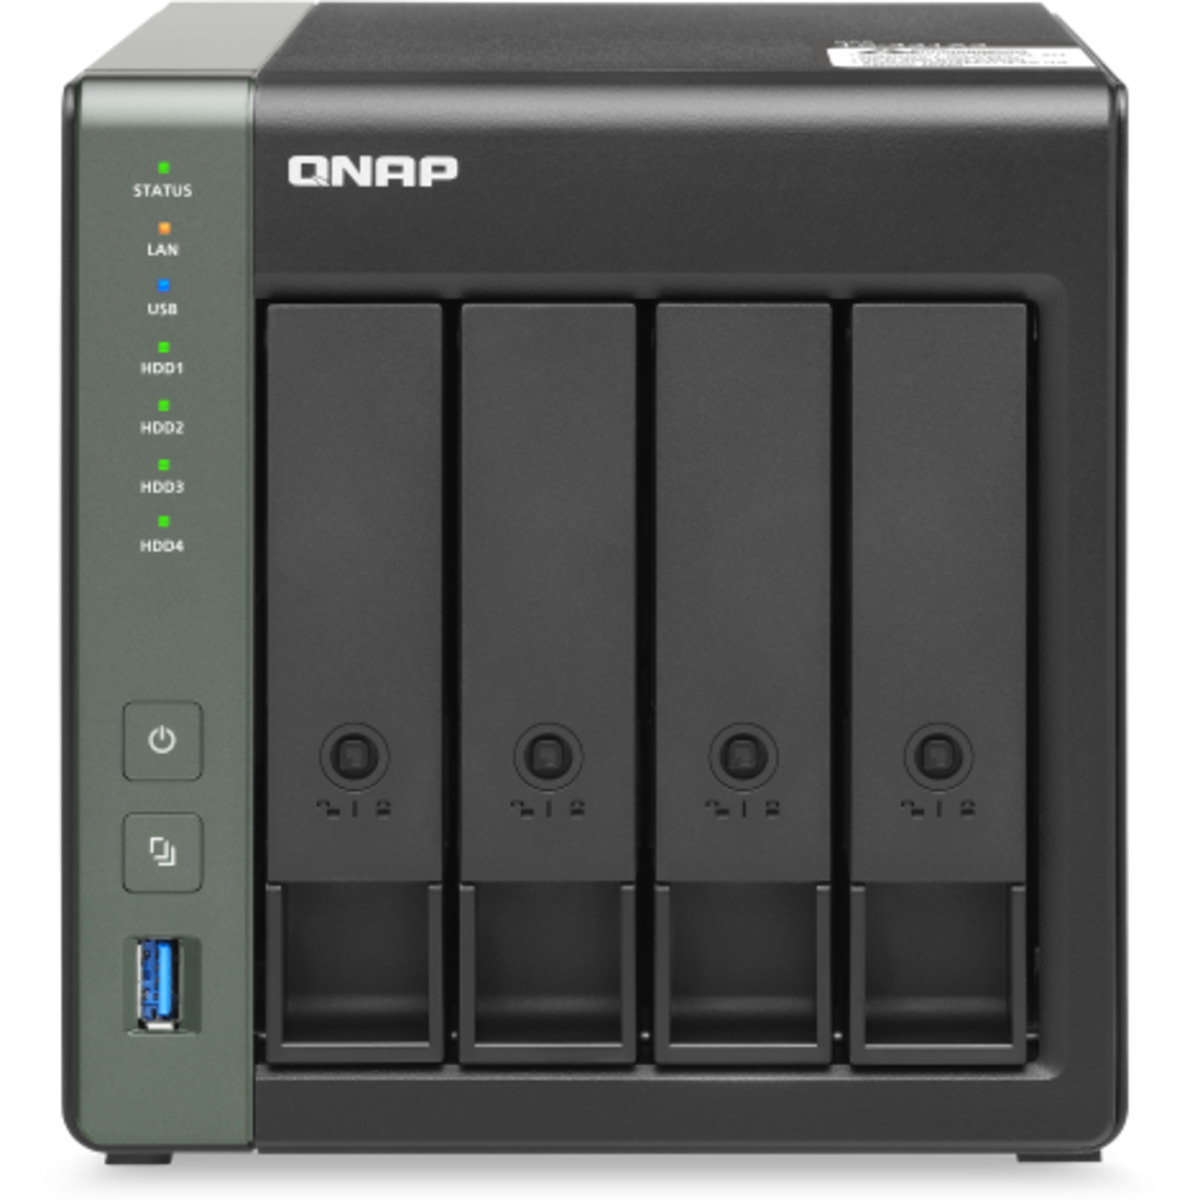 QNAP TS-431X3 Desktop 4-Bay Multimedia / Power User / Business NAS - Network Attached Storage Device Burn-In Tested Configurations - FREE RAM UPGRADE TS-431X3